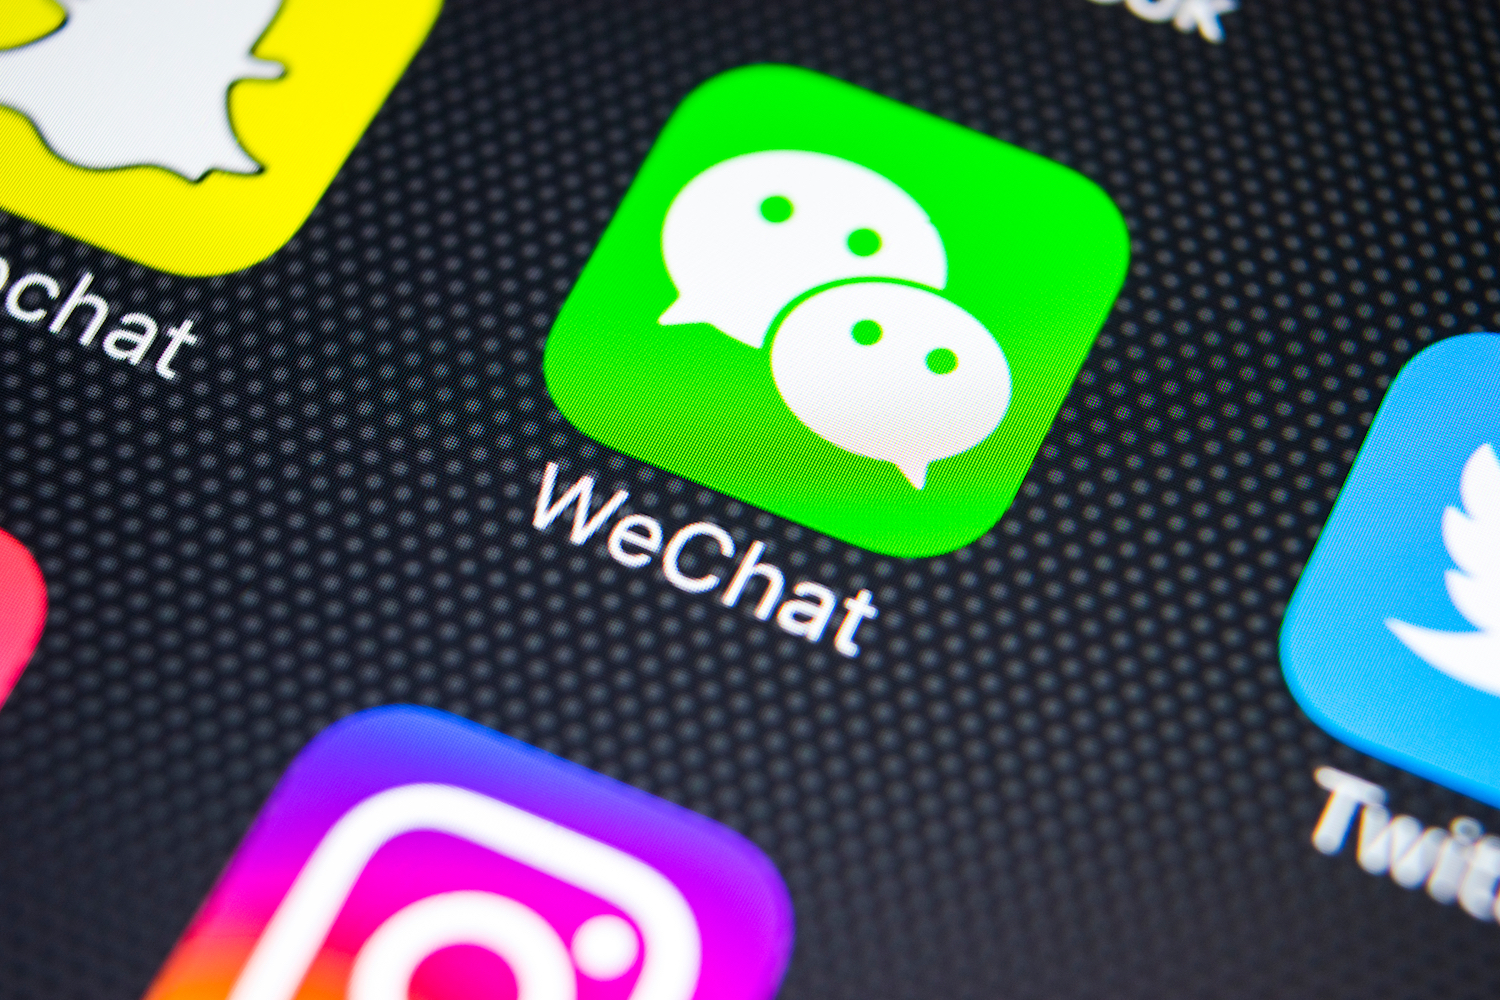 A-wechat-ban-should-be-the-moment-for-decentralized-tech-but-it’s-not.